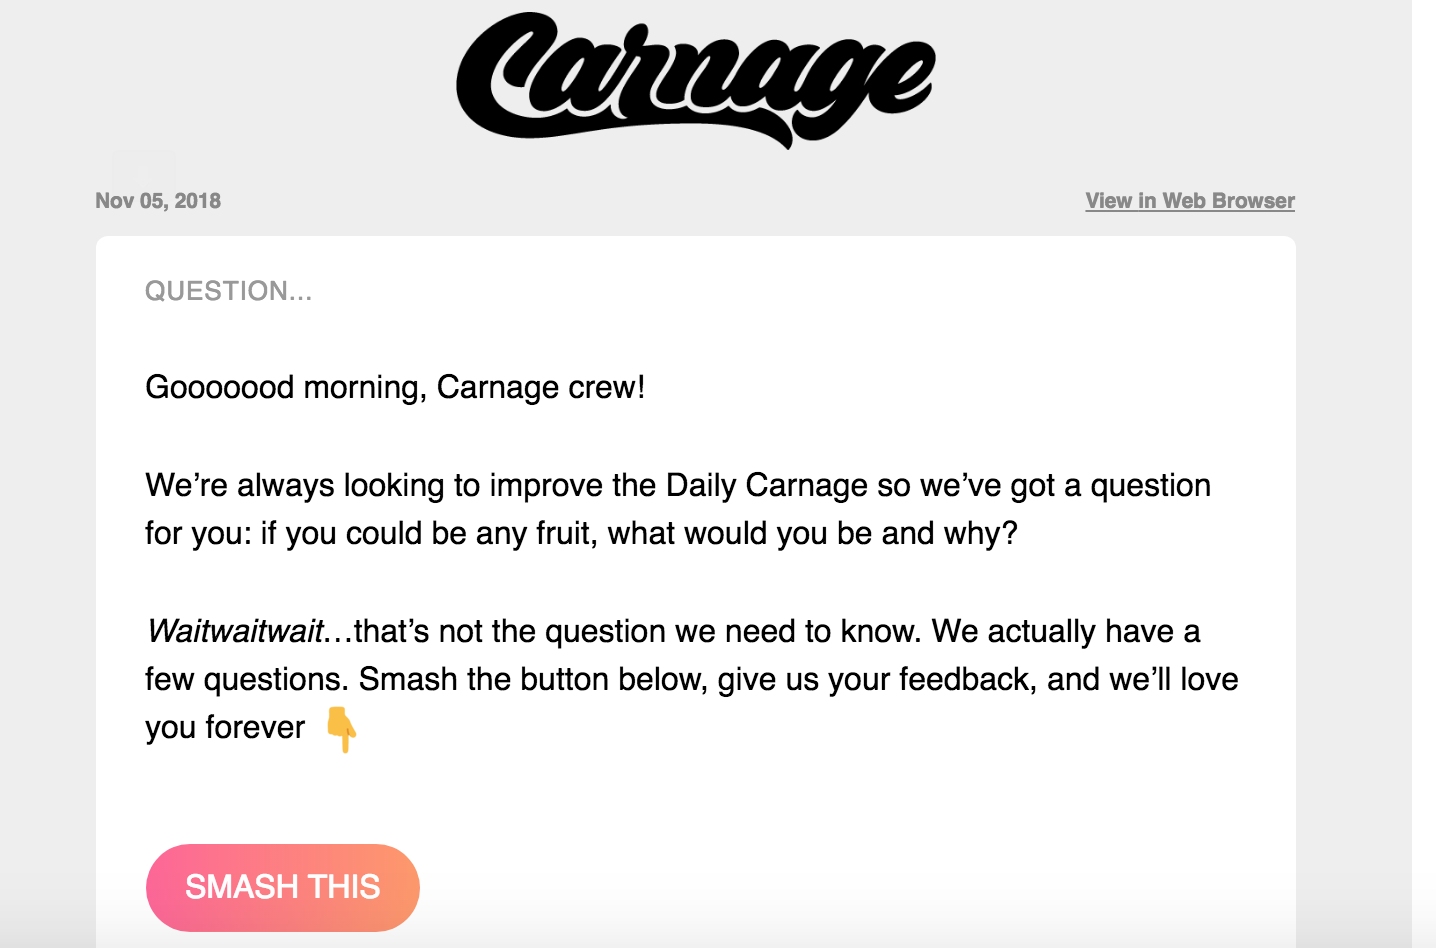 Daily Carnage survey message